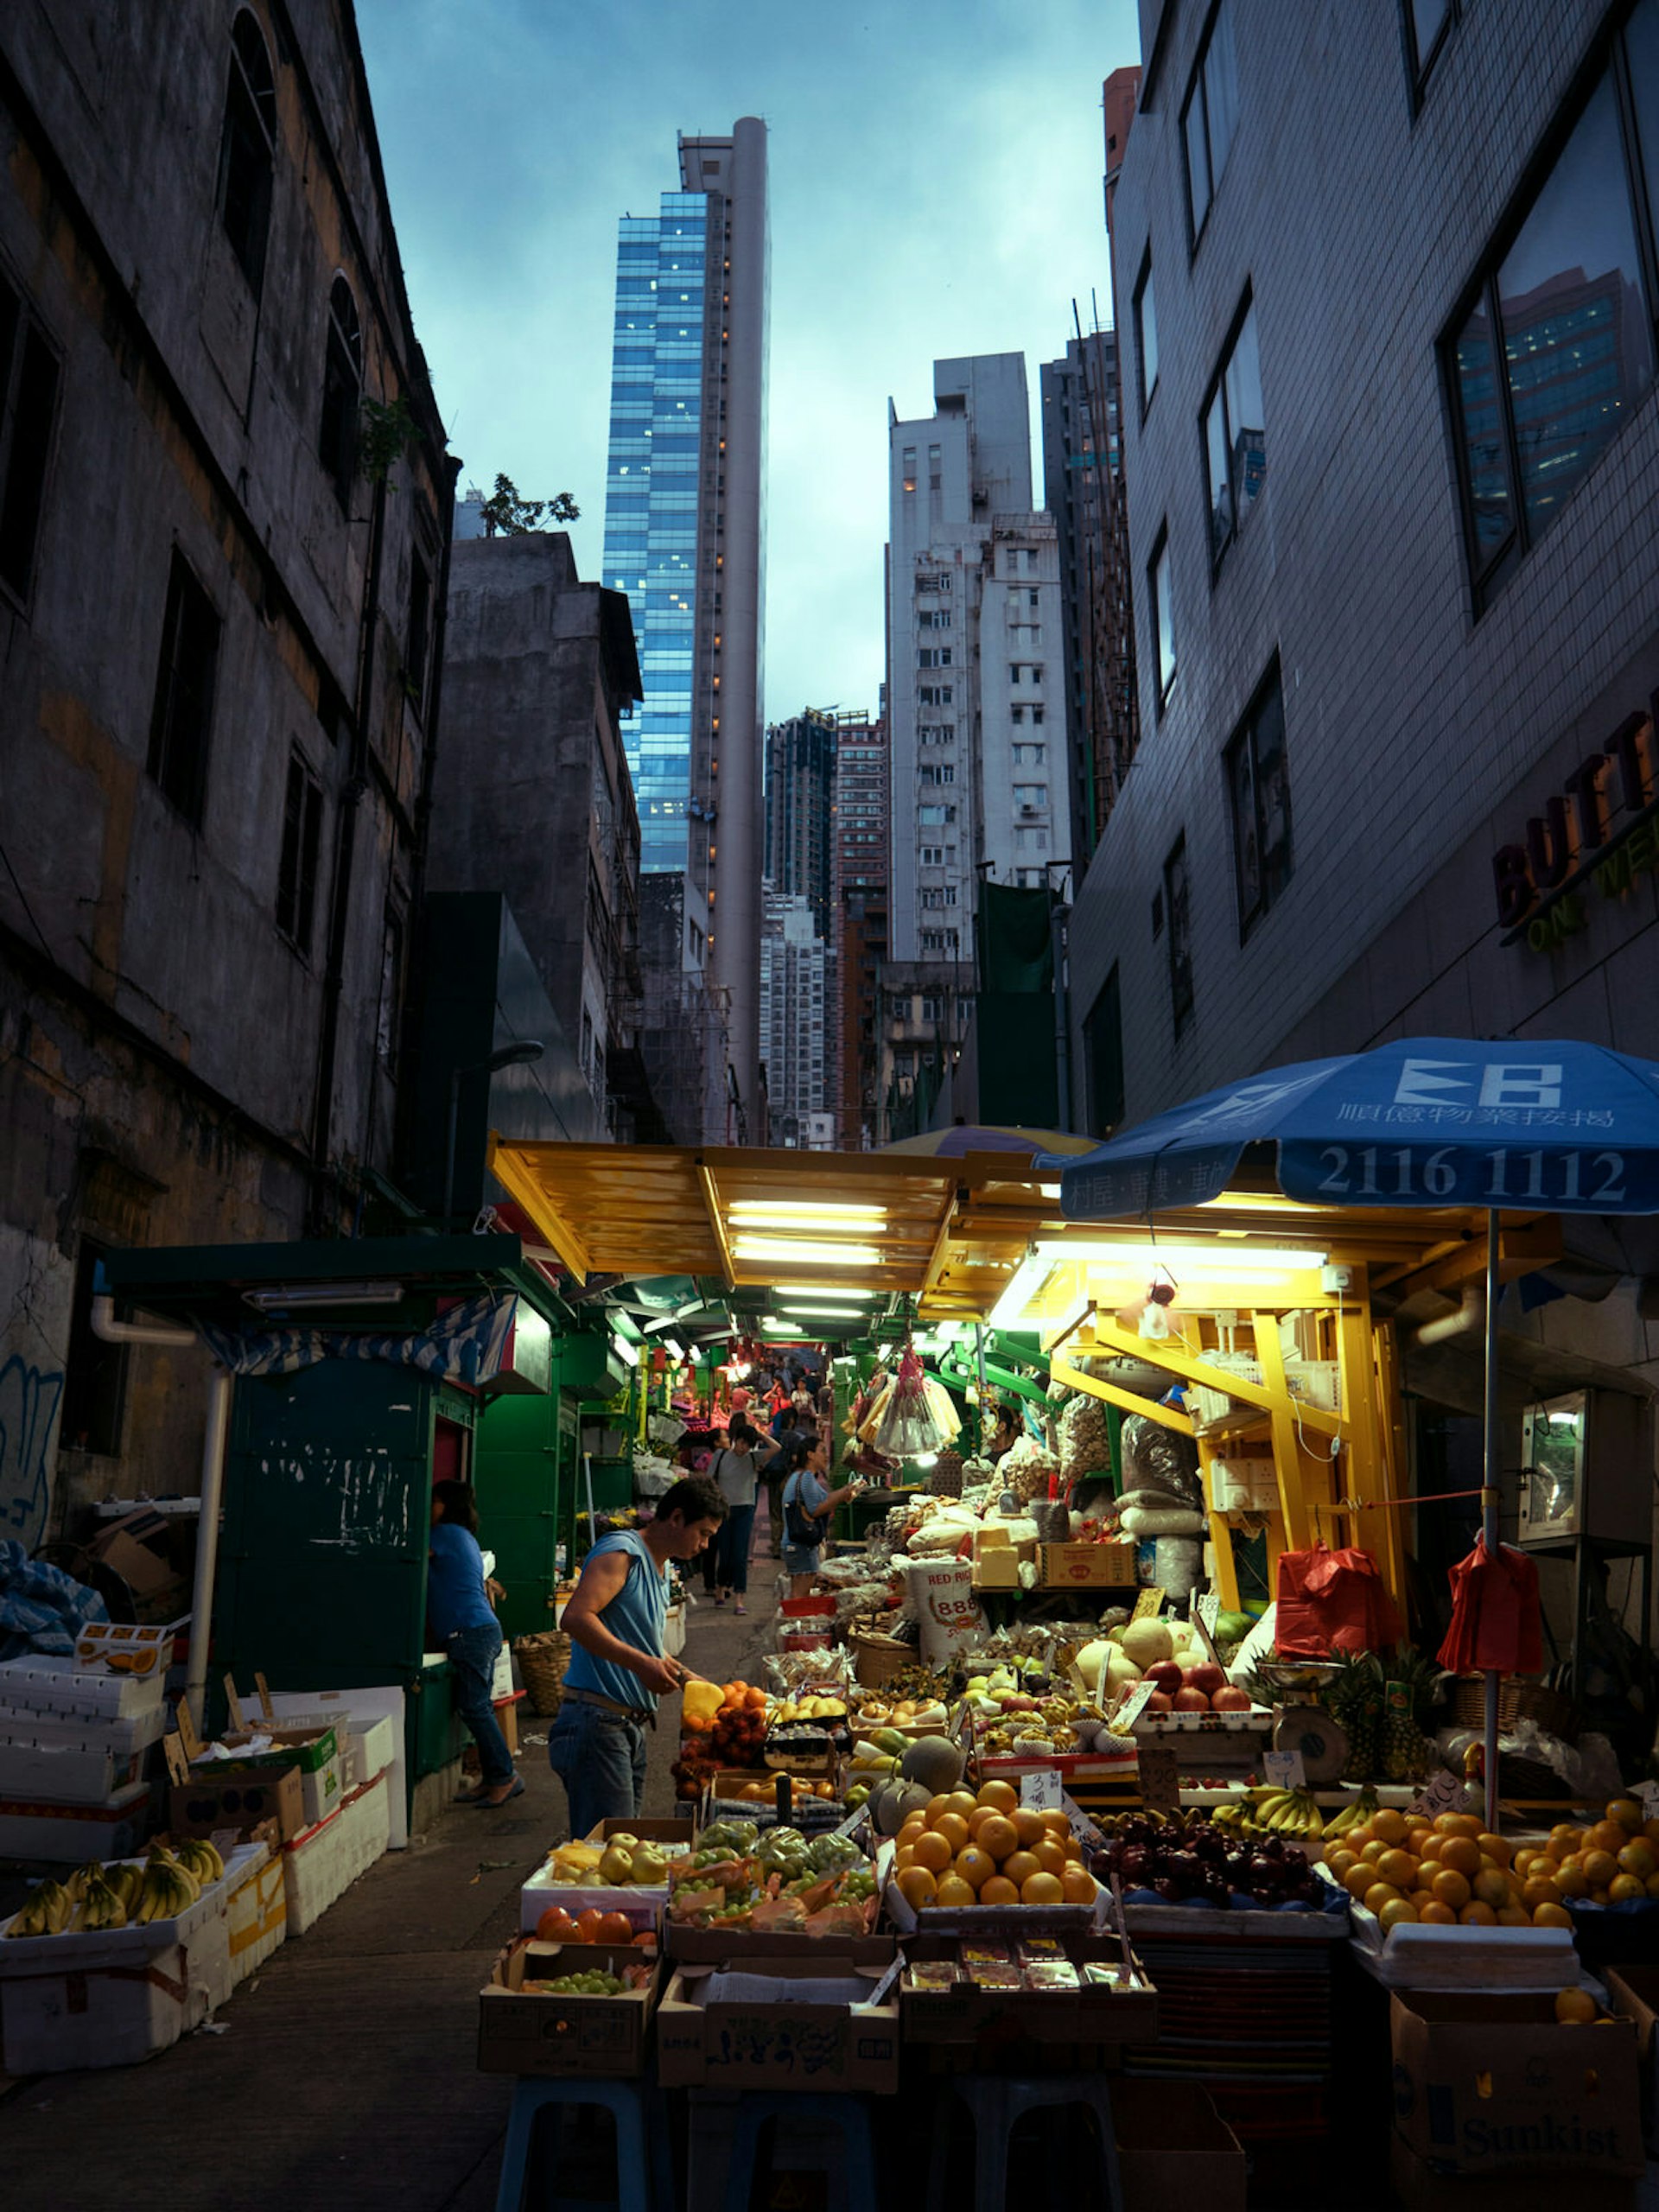 Small stalls with awnings and bare bulbs sell fruit and veg on Graham Street in the shadow of high-rise buildings